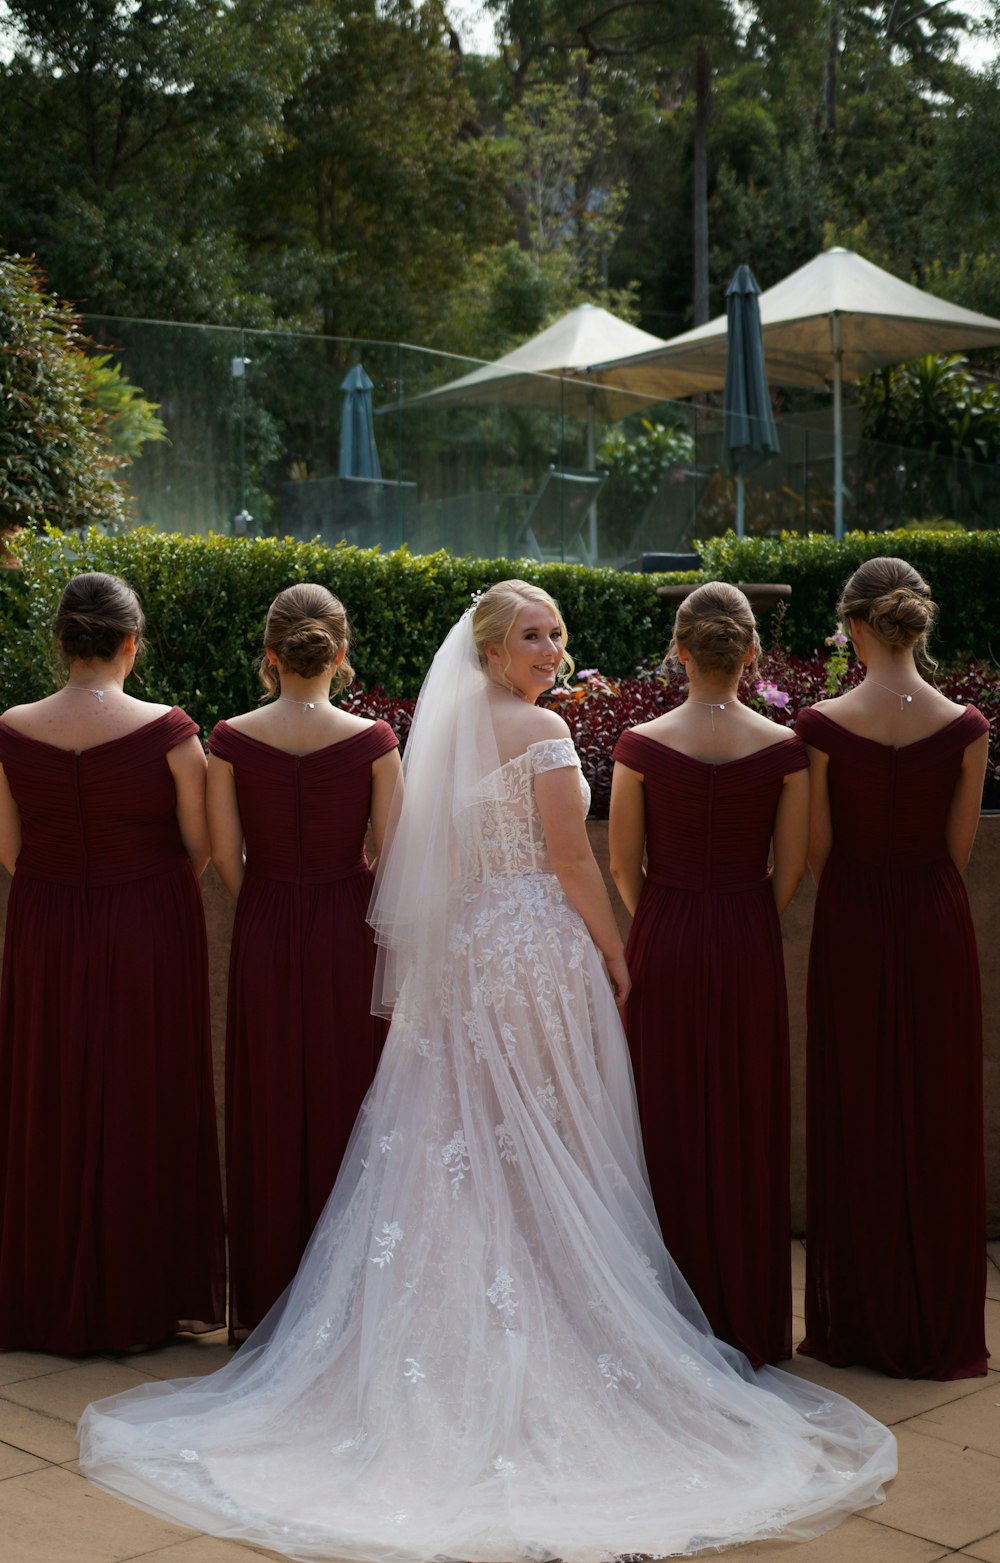 a bride and her bridesmaids standing together